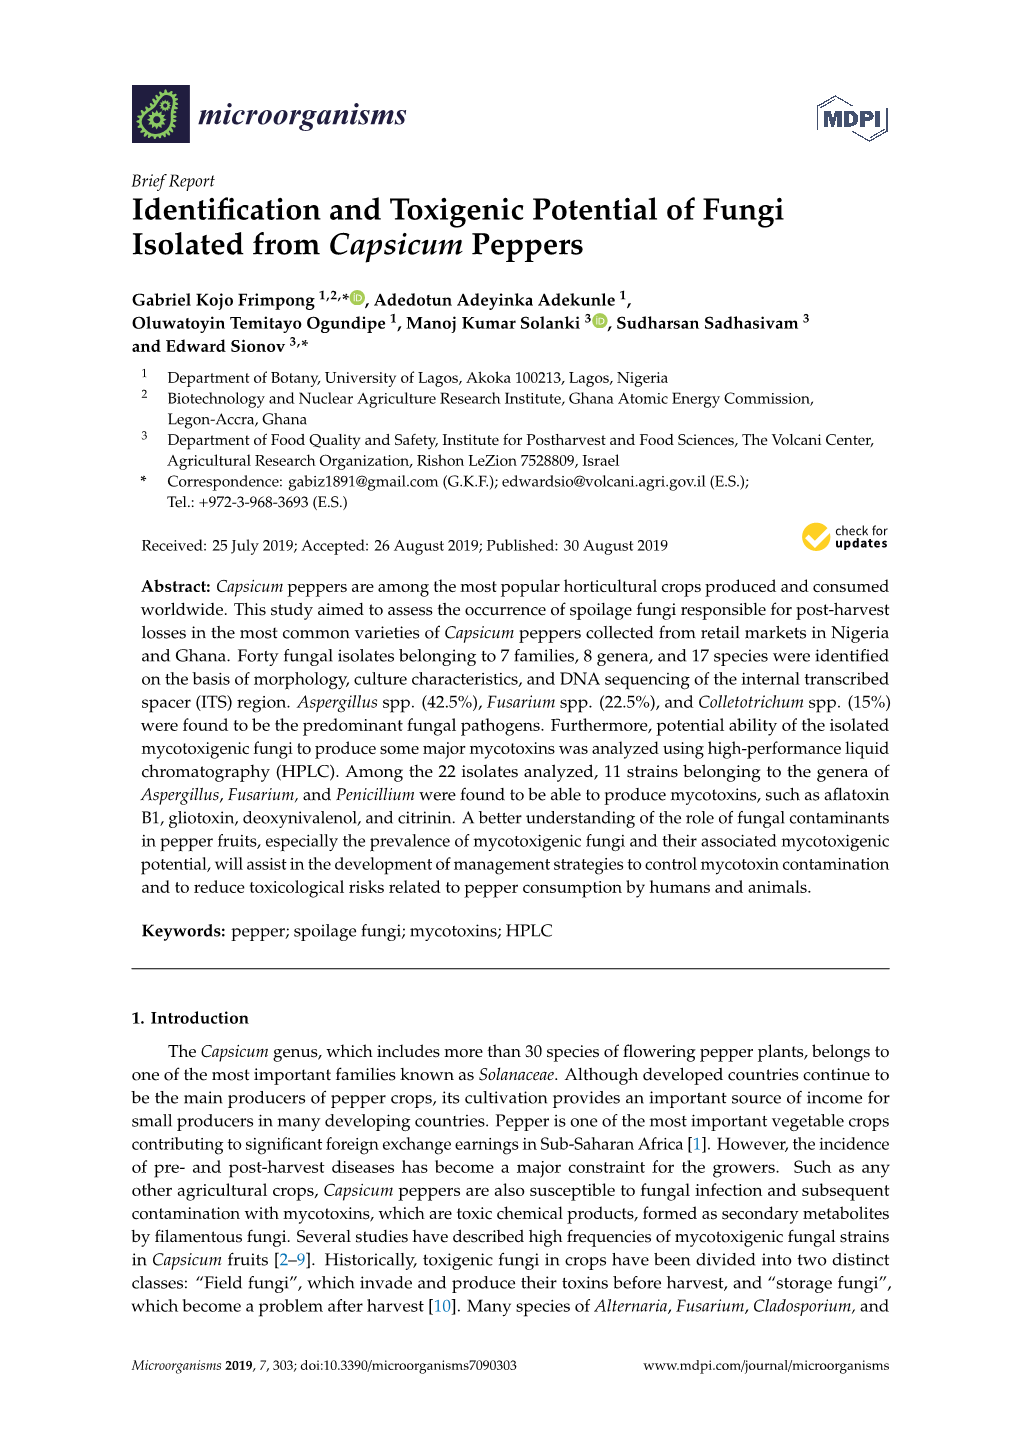 Identification and Toxigenic Potential of Fungi Isolated from Capsicum